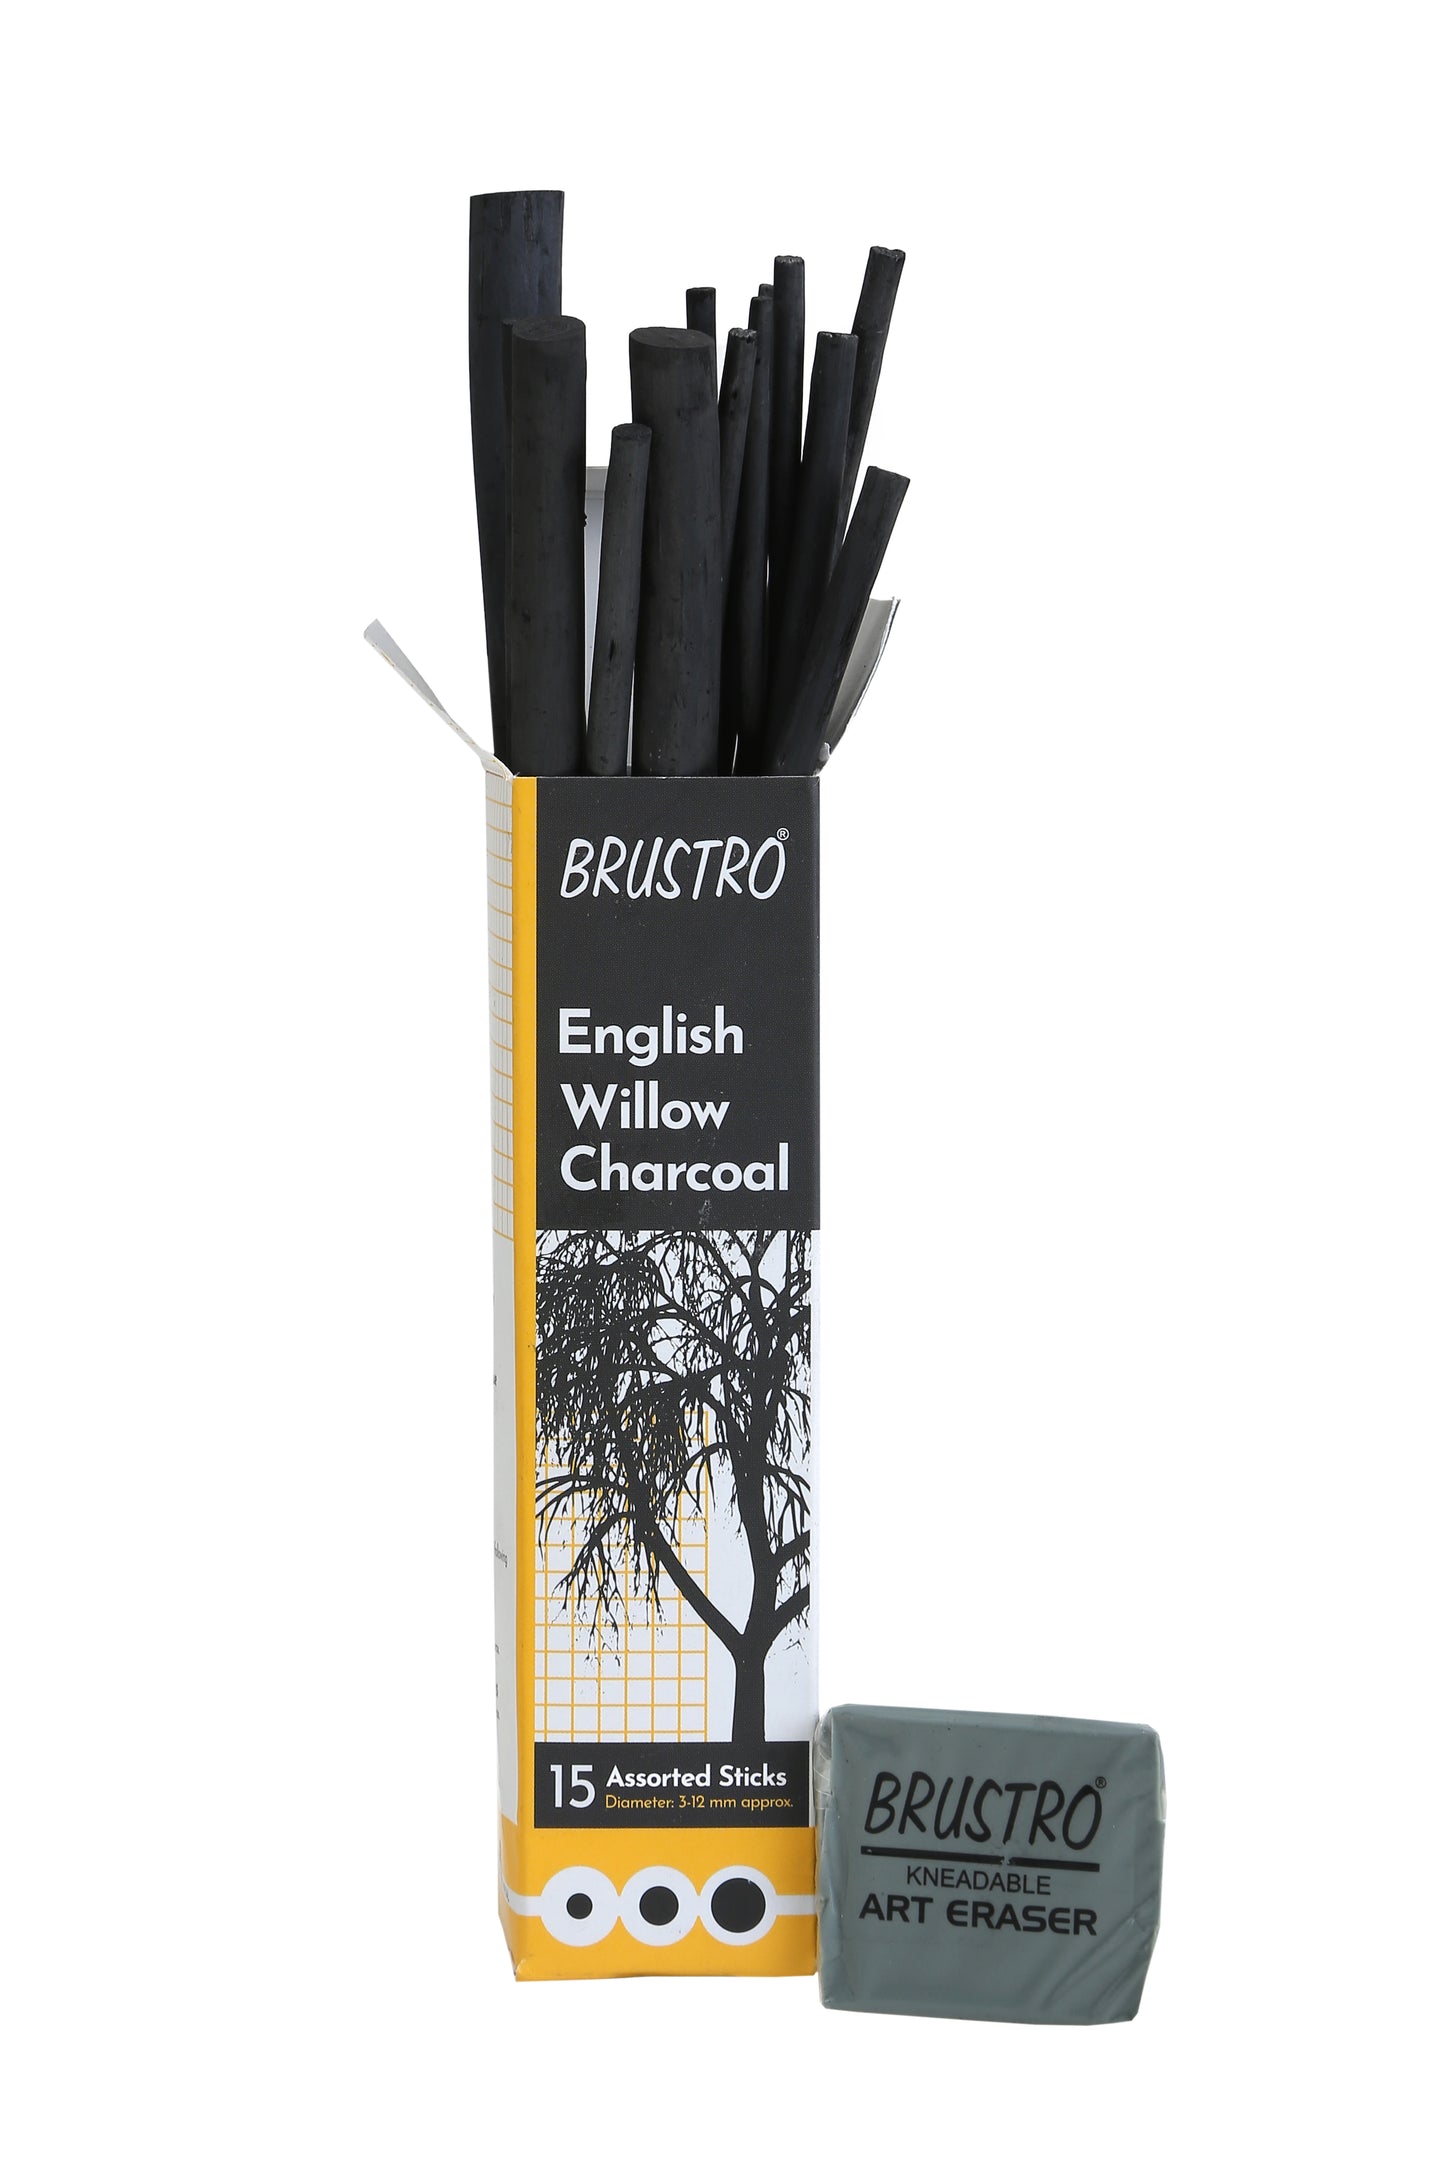 Brustro English Willow Charcoal Assorted (15 Sticks) (Free 1 Brustro Kneadable eraser and Blending Stump Set of 5 Worth Rs. 185)